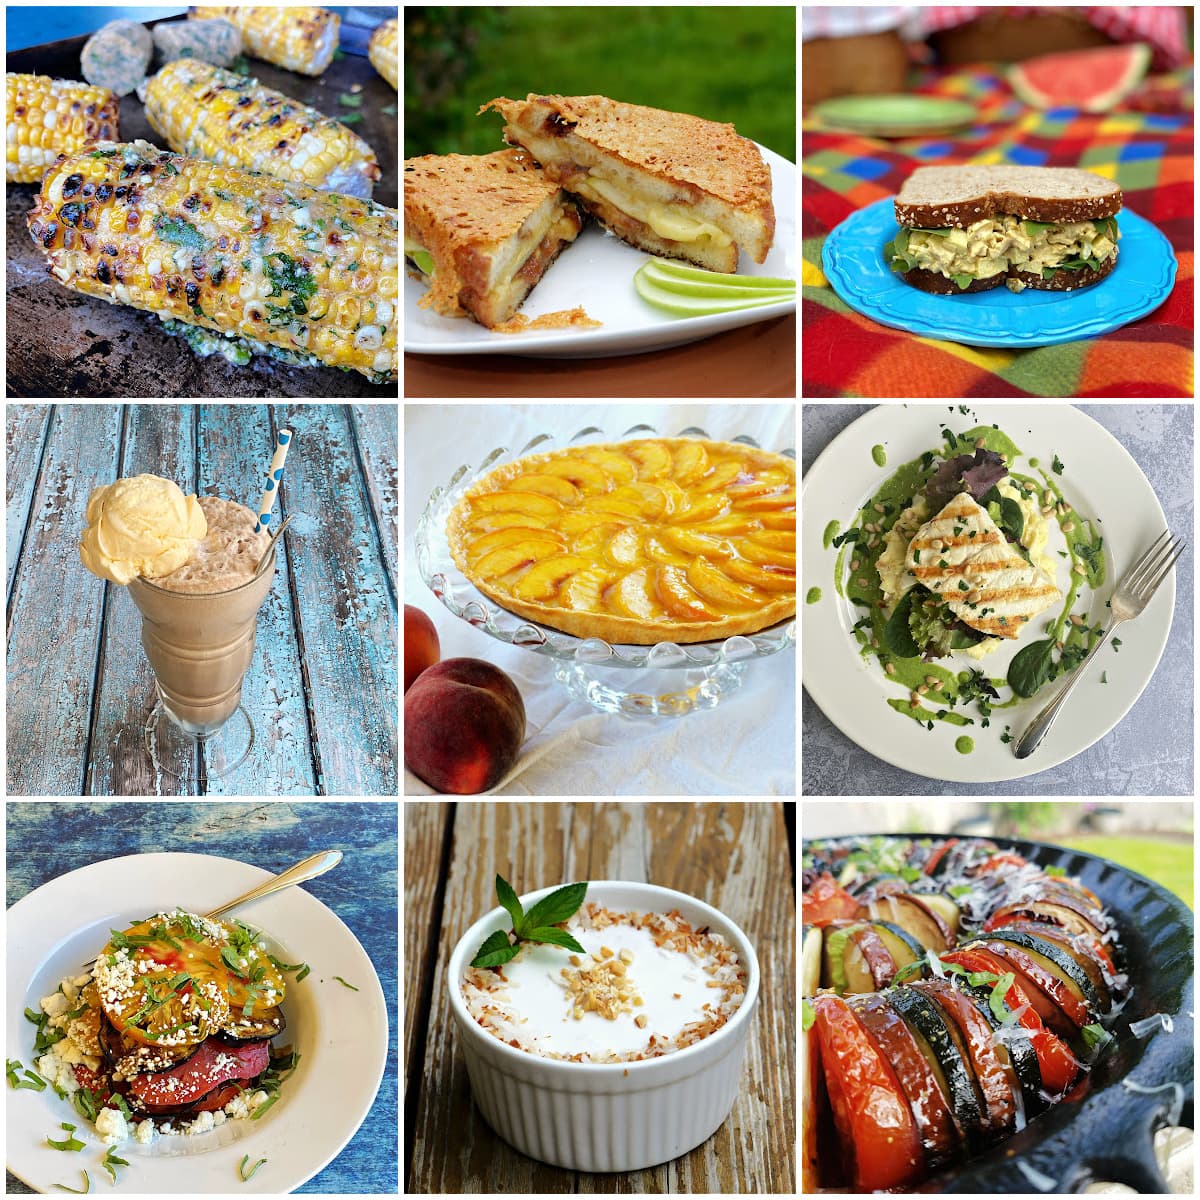 9-panel collage showing images of food and recipes from June Food Holidays calendar.